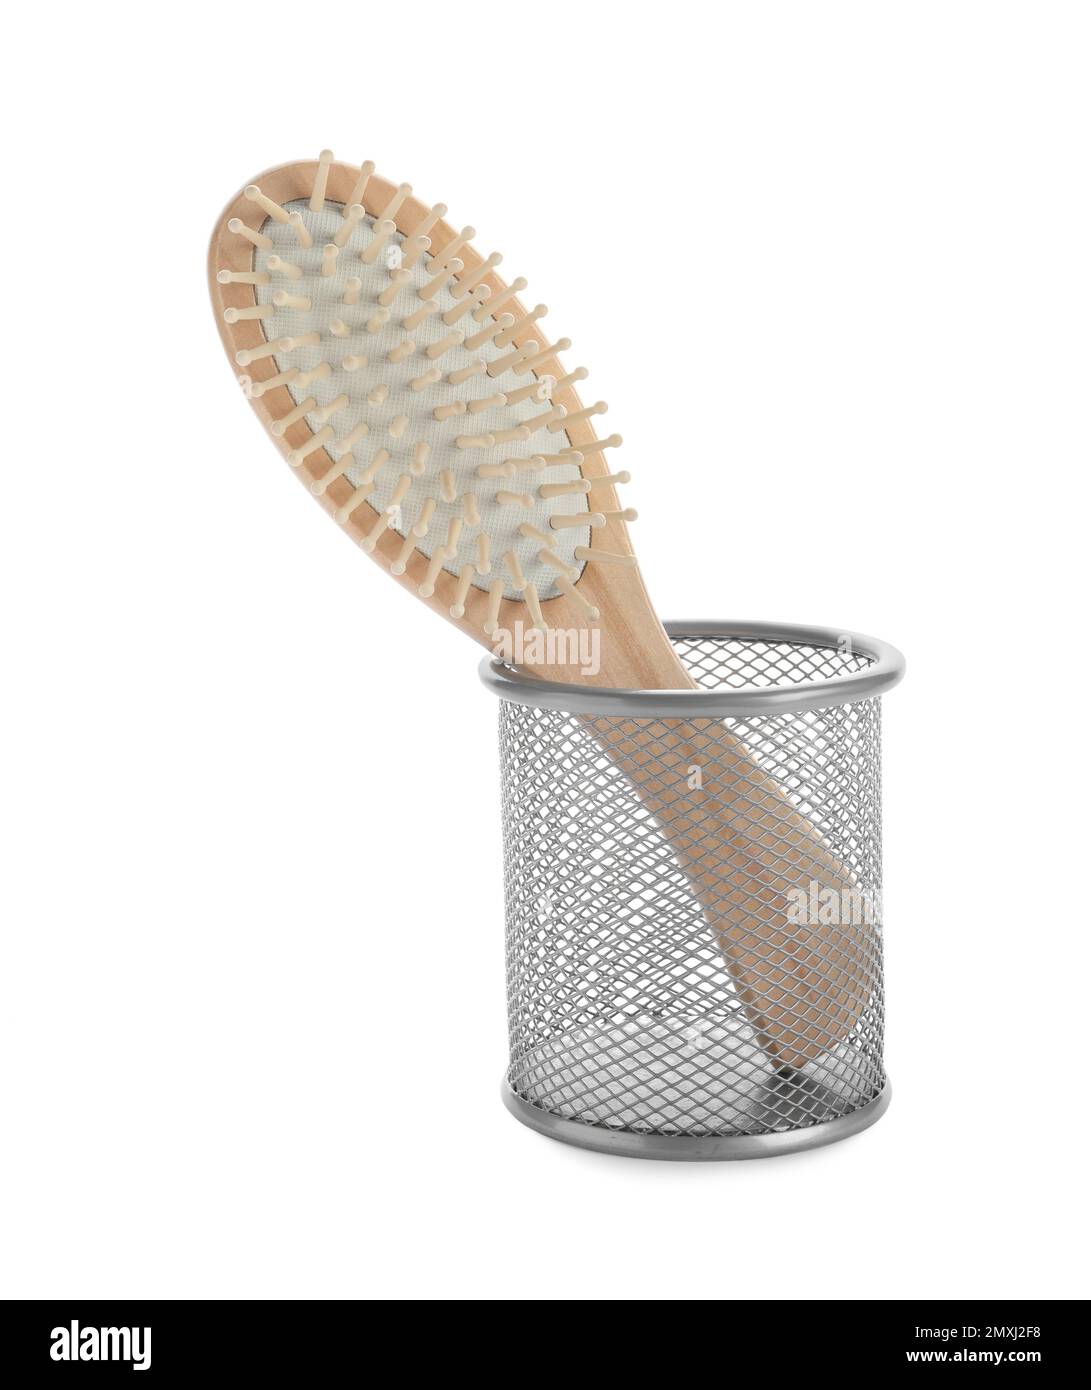 New wooden hair brush in metal holder isolated on white Stock Photo - Alamy